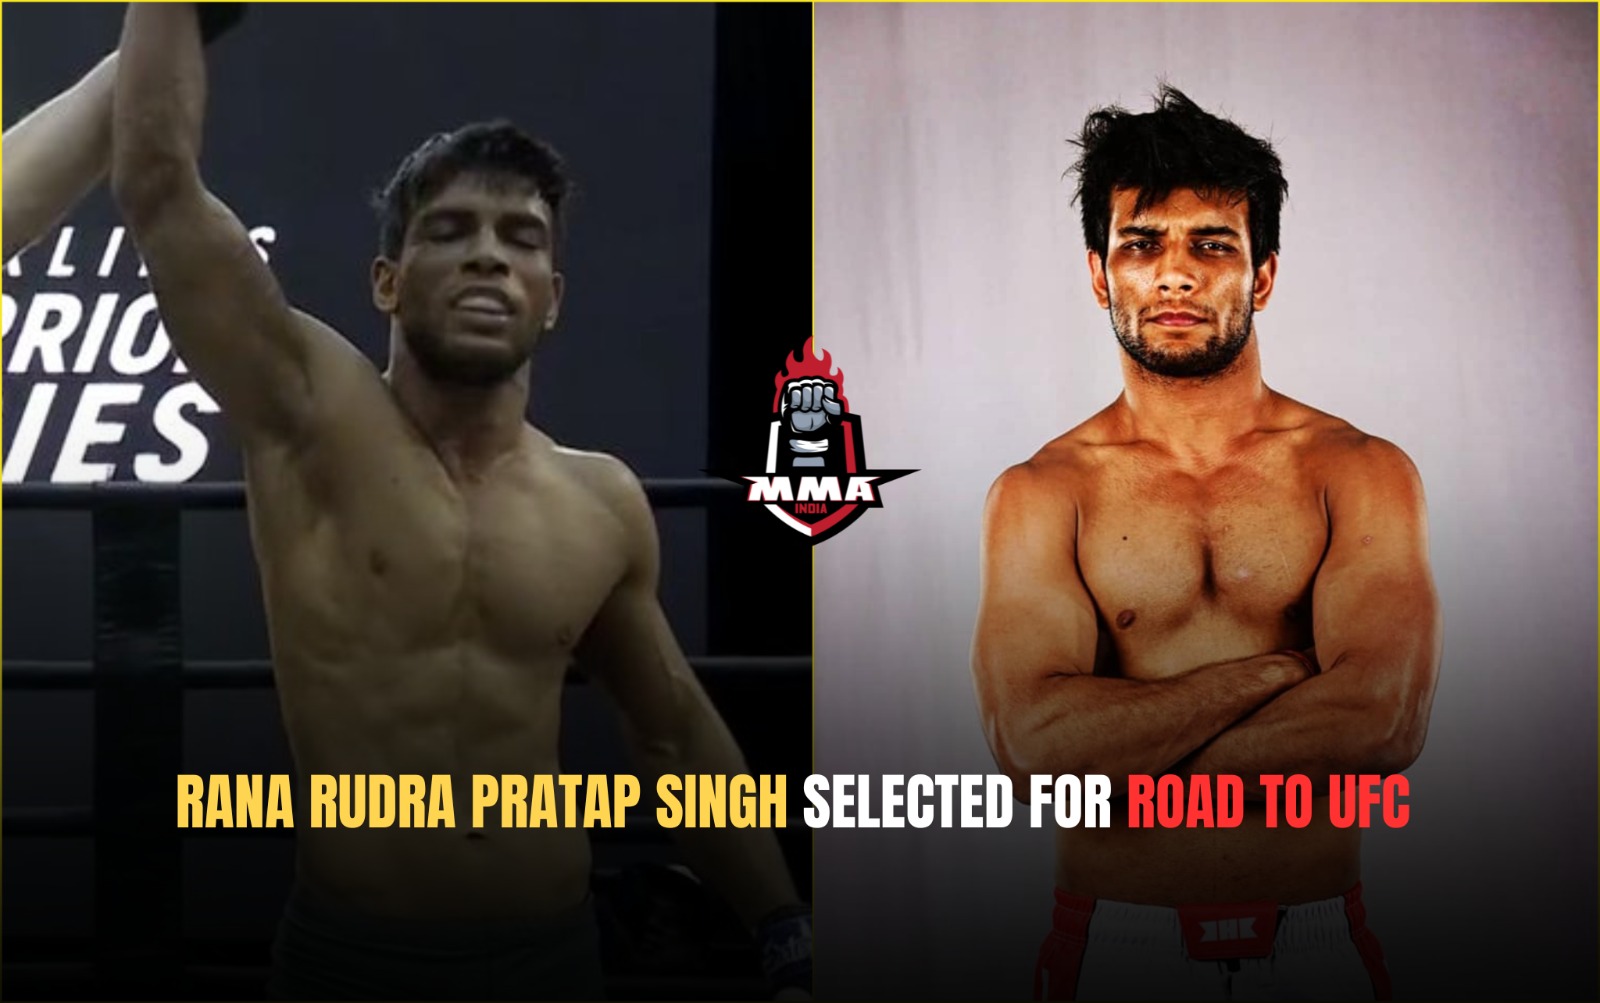 Rana Rudra Pratap Singh selected for Road To UFC